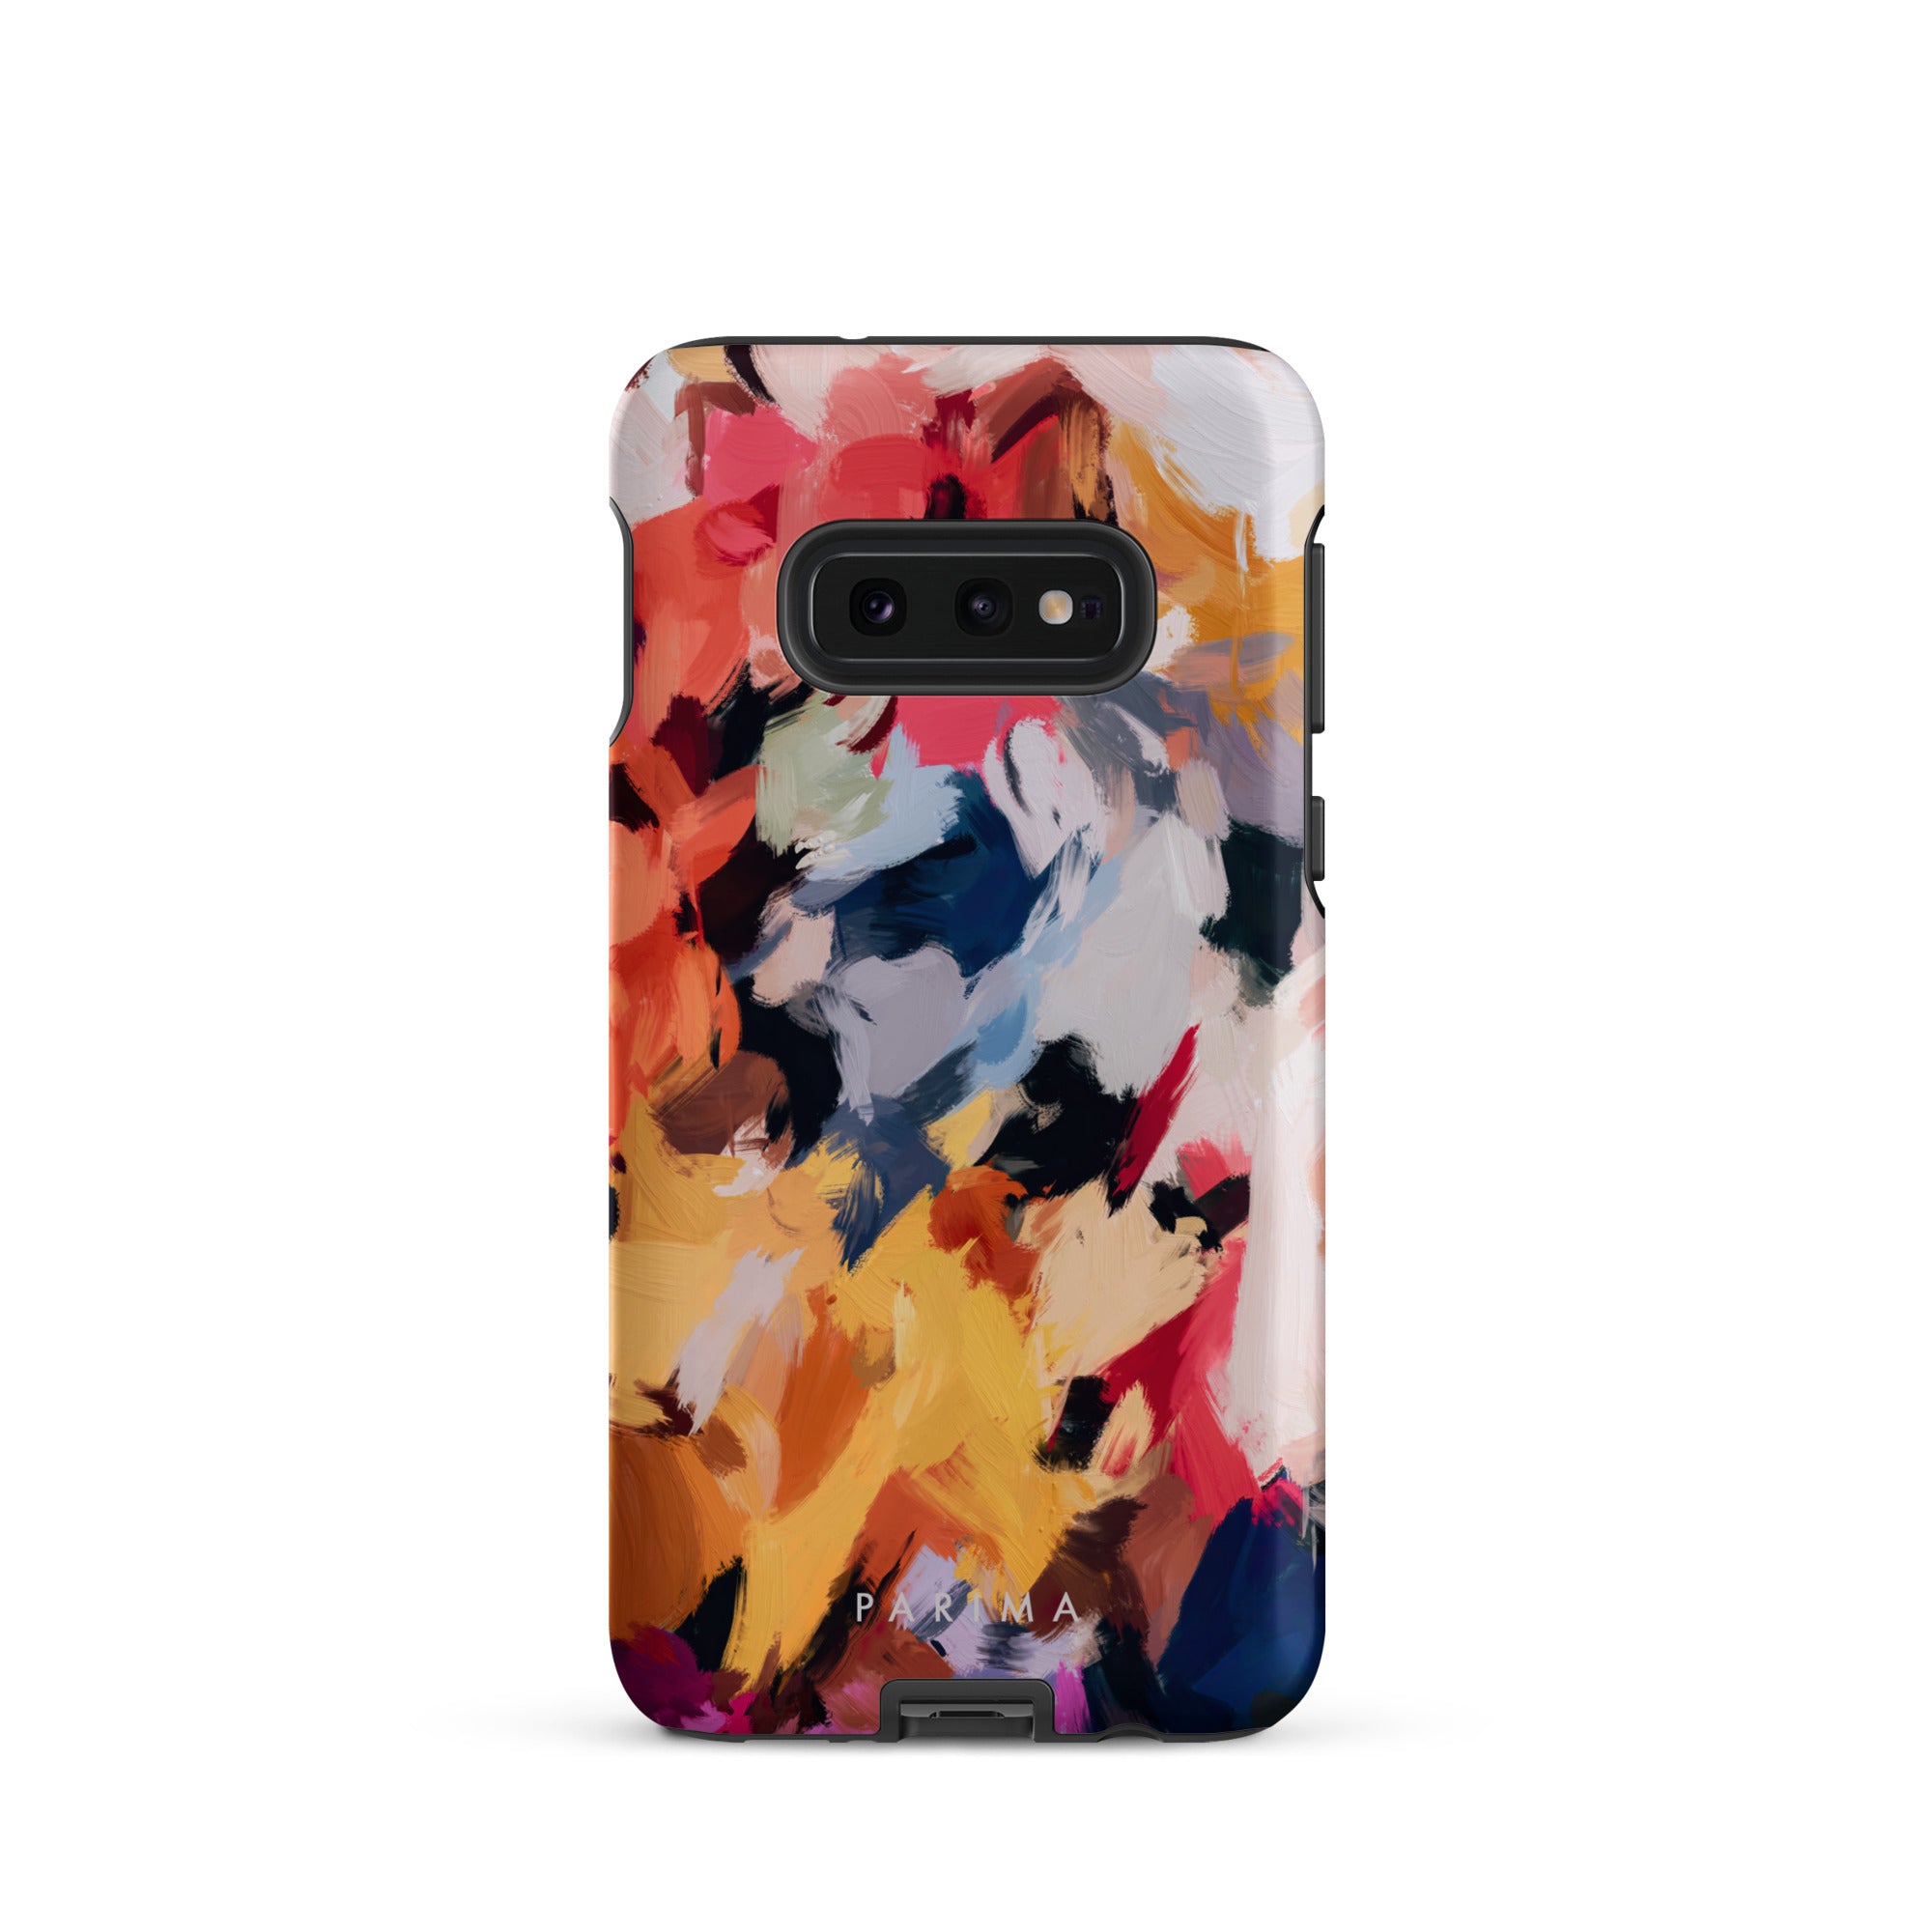 Wilde, blue and yellow multicolor abstract art on Samsung Galaxy S10e tough case by Parima Studio